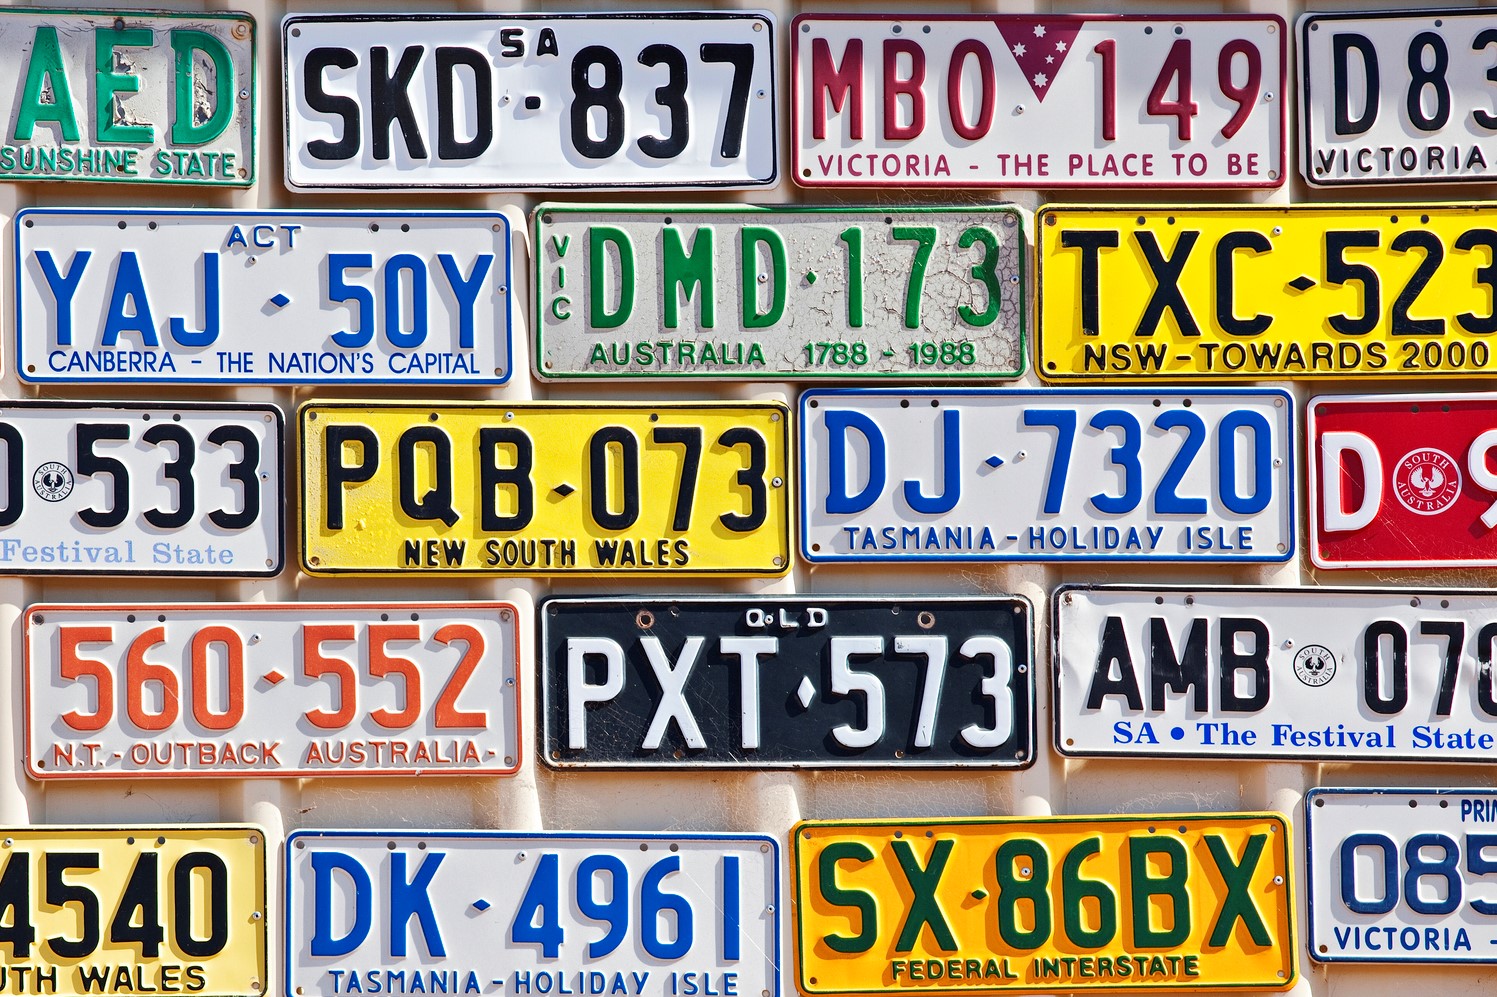 rumour-confirmed-victorian-number-plate-sells-for-1-1-million-3aw